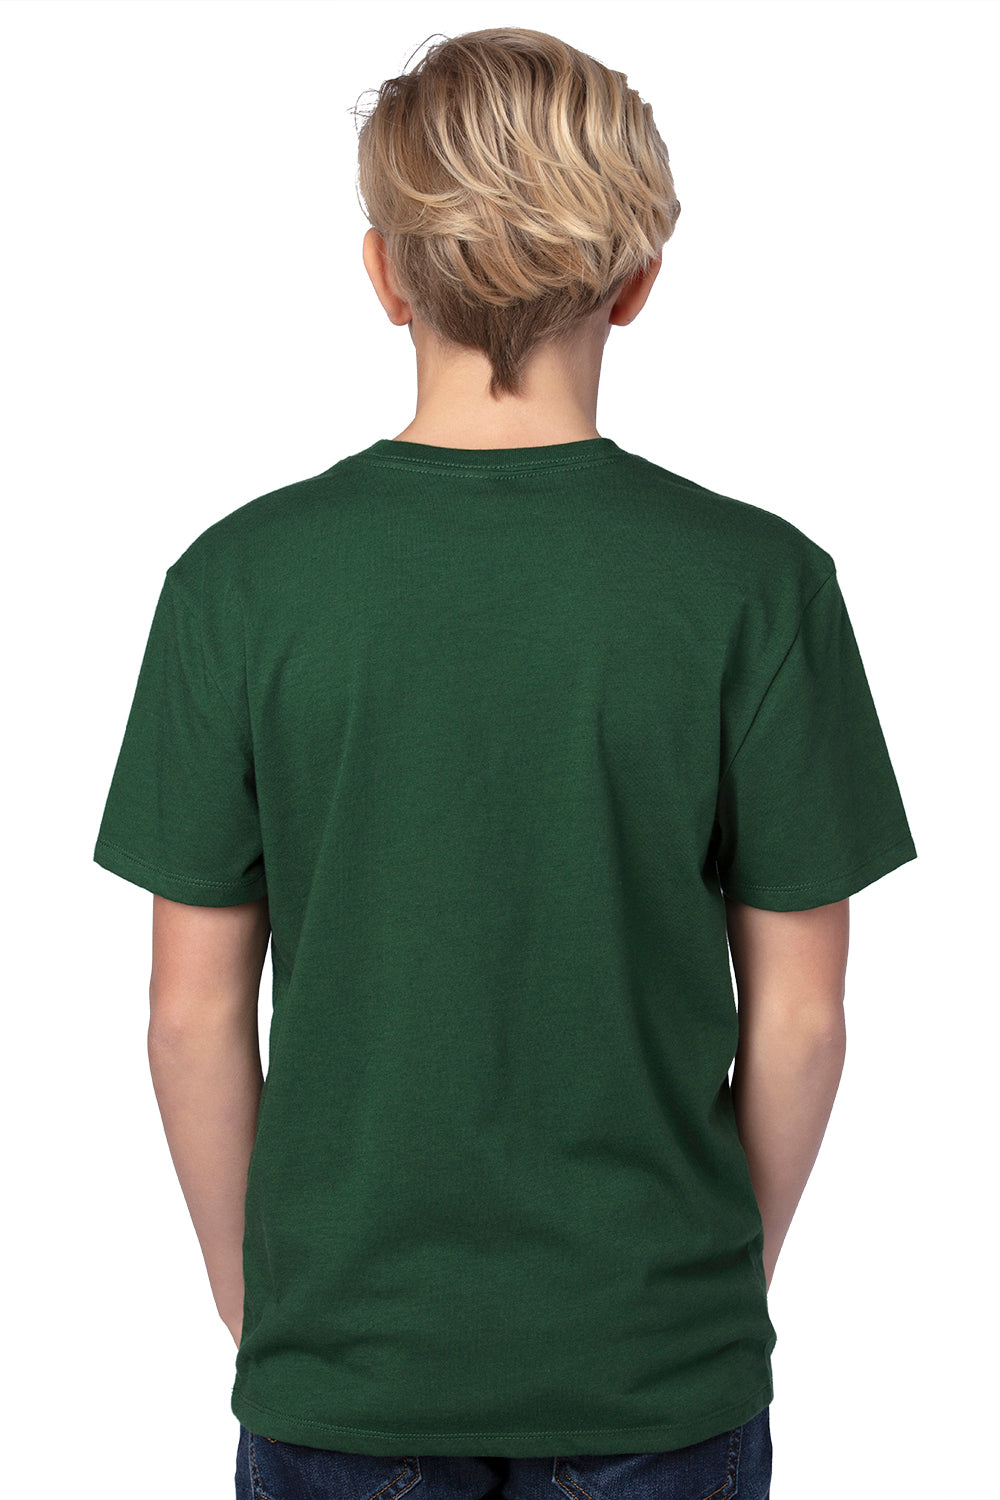 Threadfast Apparel 600A Youth Ultimate Short Sleeve Crewneck T-Shirt Forest Green Back